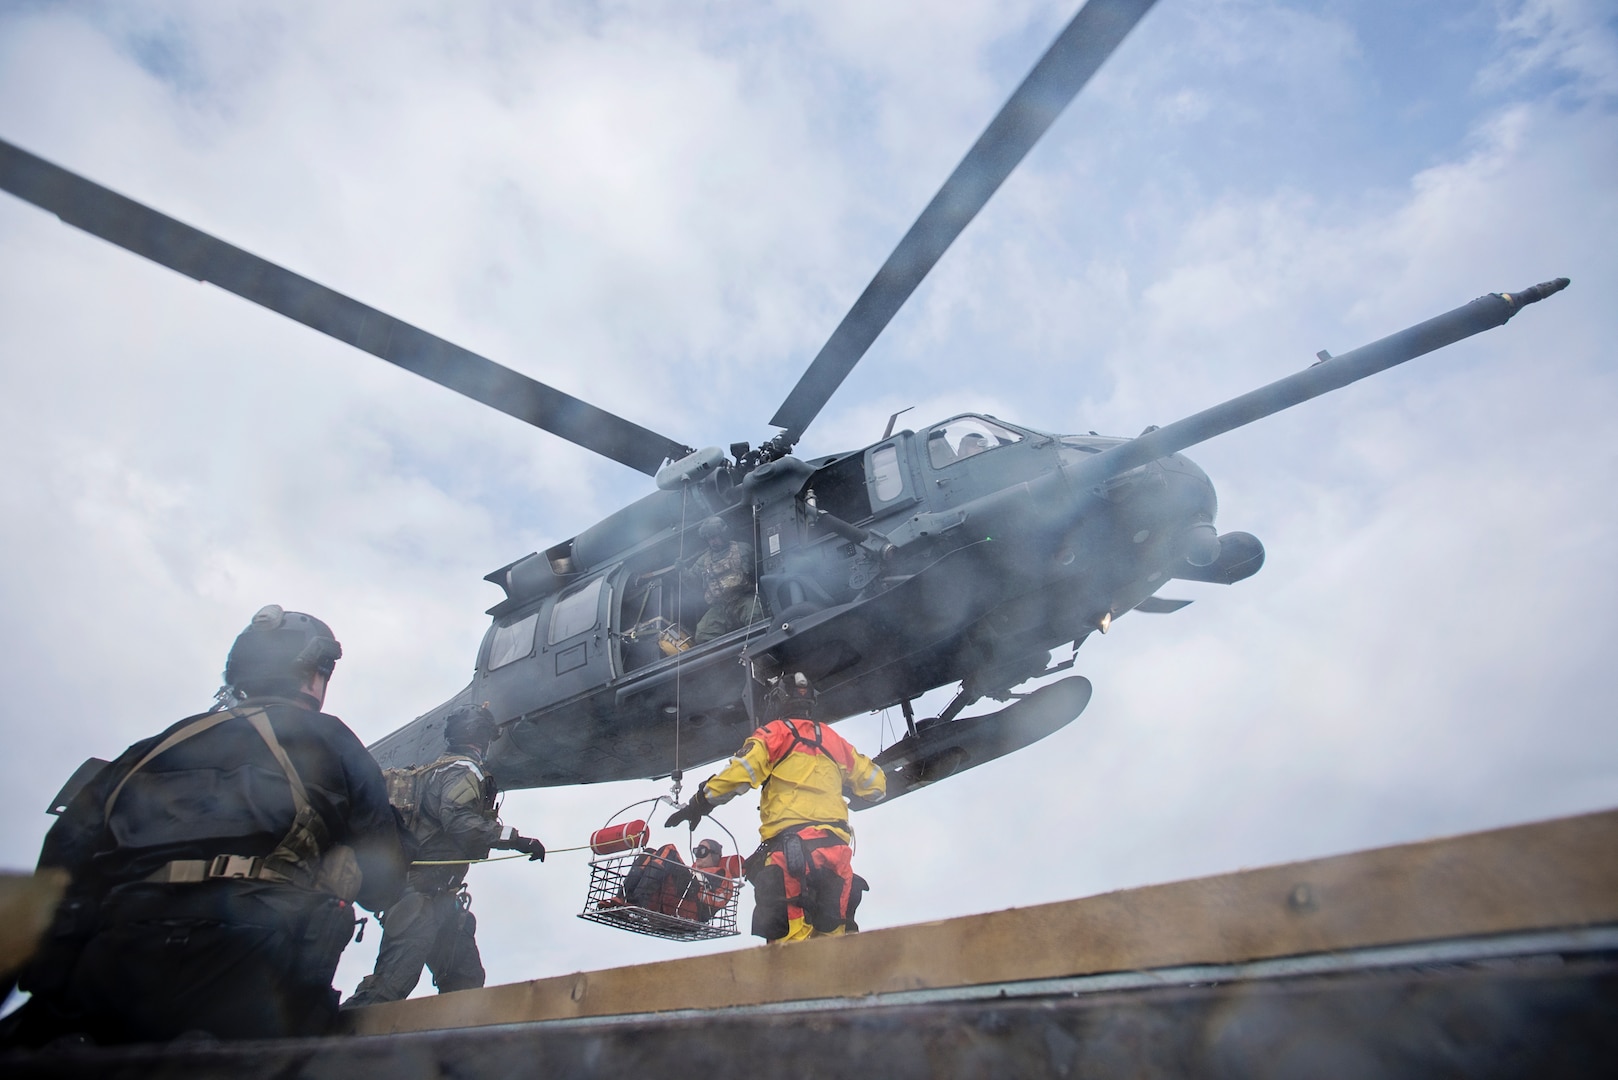 Members of the 210th, 211th and 212th Rescue Squadrons from the Alaska Air National Guard took part in a simulated casualty evacuation training exercise off the coast of Homer, Alaska, April 27, 2016. The 176th Wing completed its 2,000th rescue mission Jan. 4, 2020, saving a distressed PA-18 Super Cub pilot on the west side of Mount Susitna.